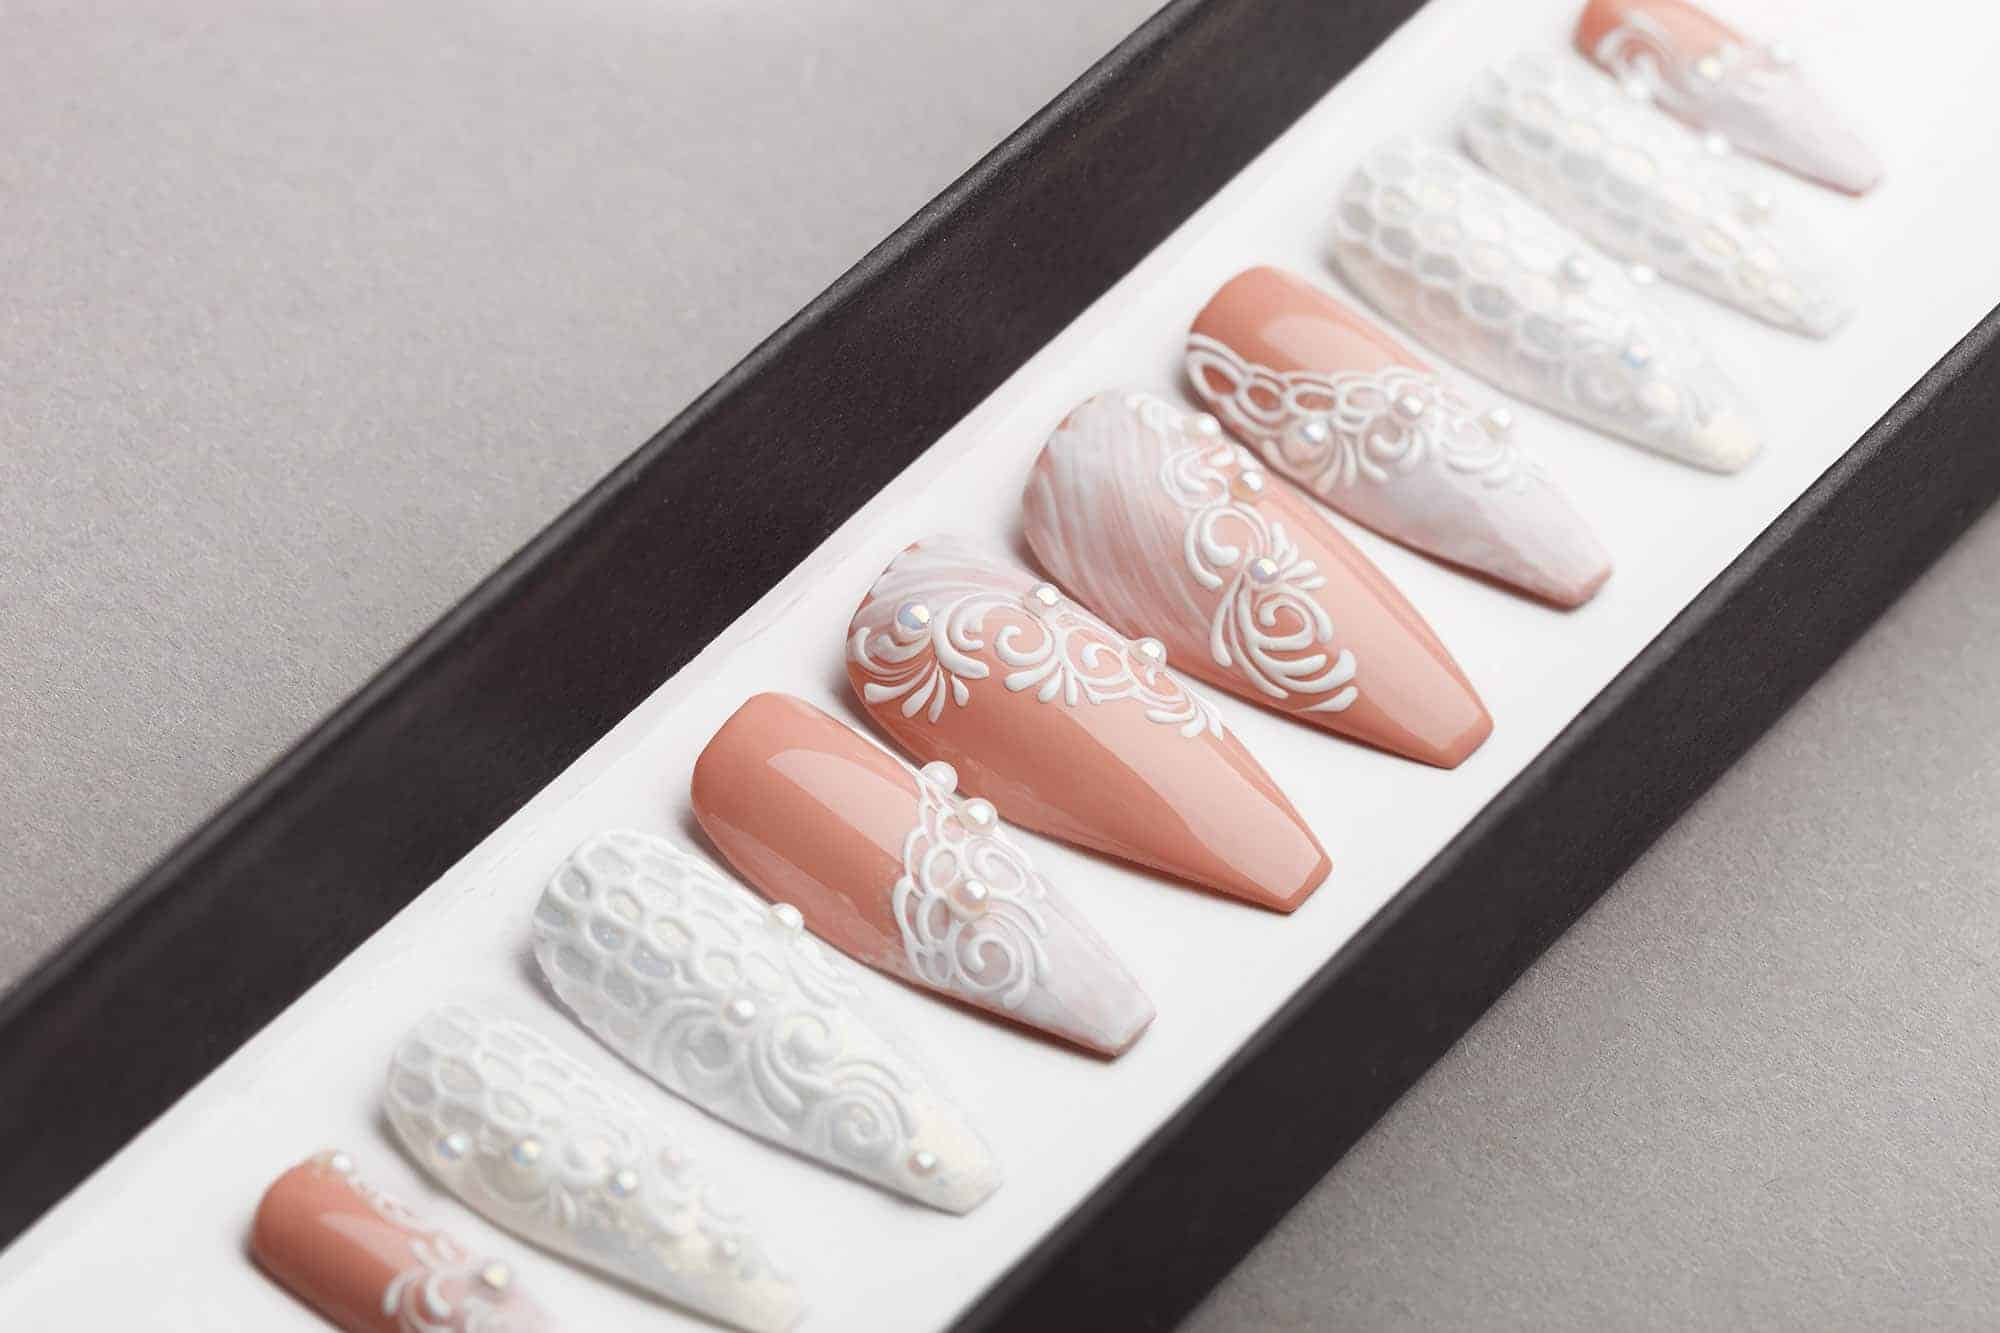 Best nails for wedding is White wedding Press on Nails.